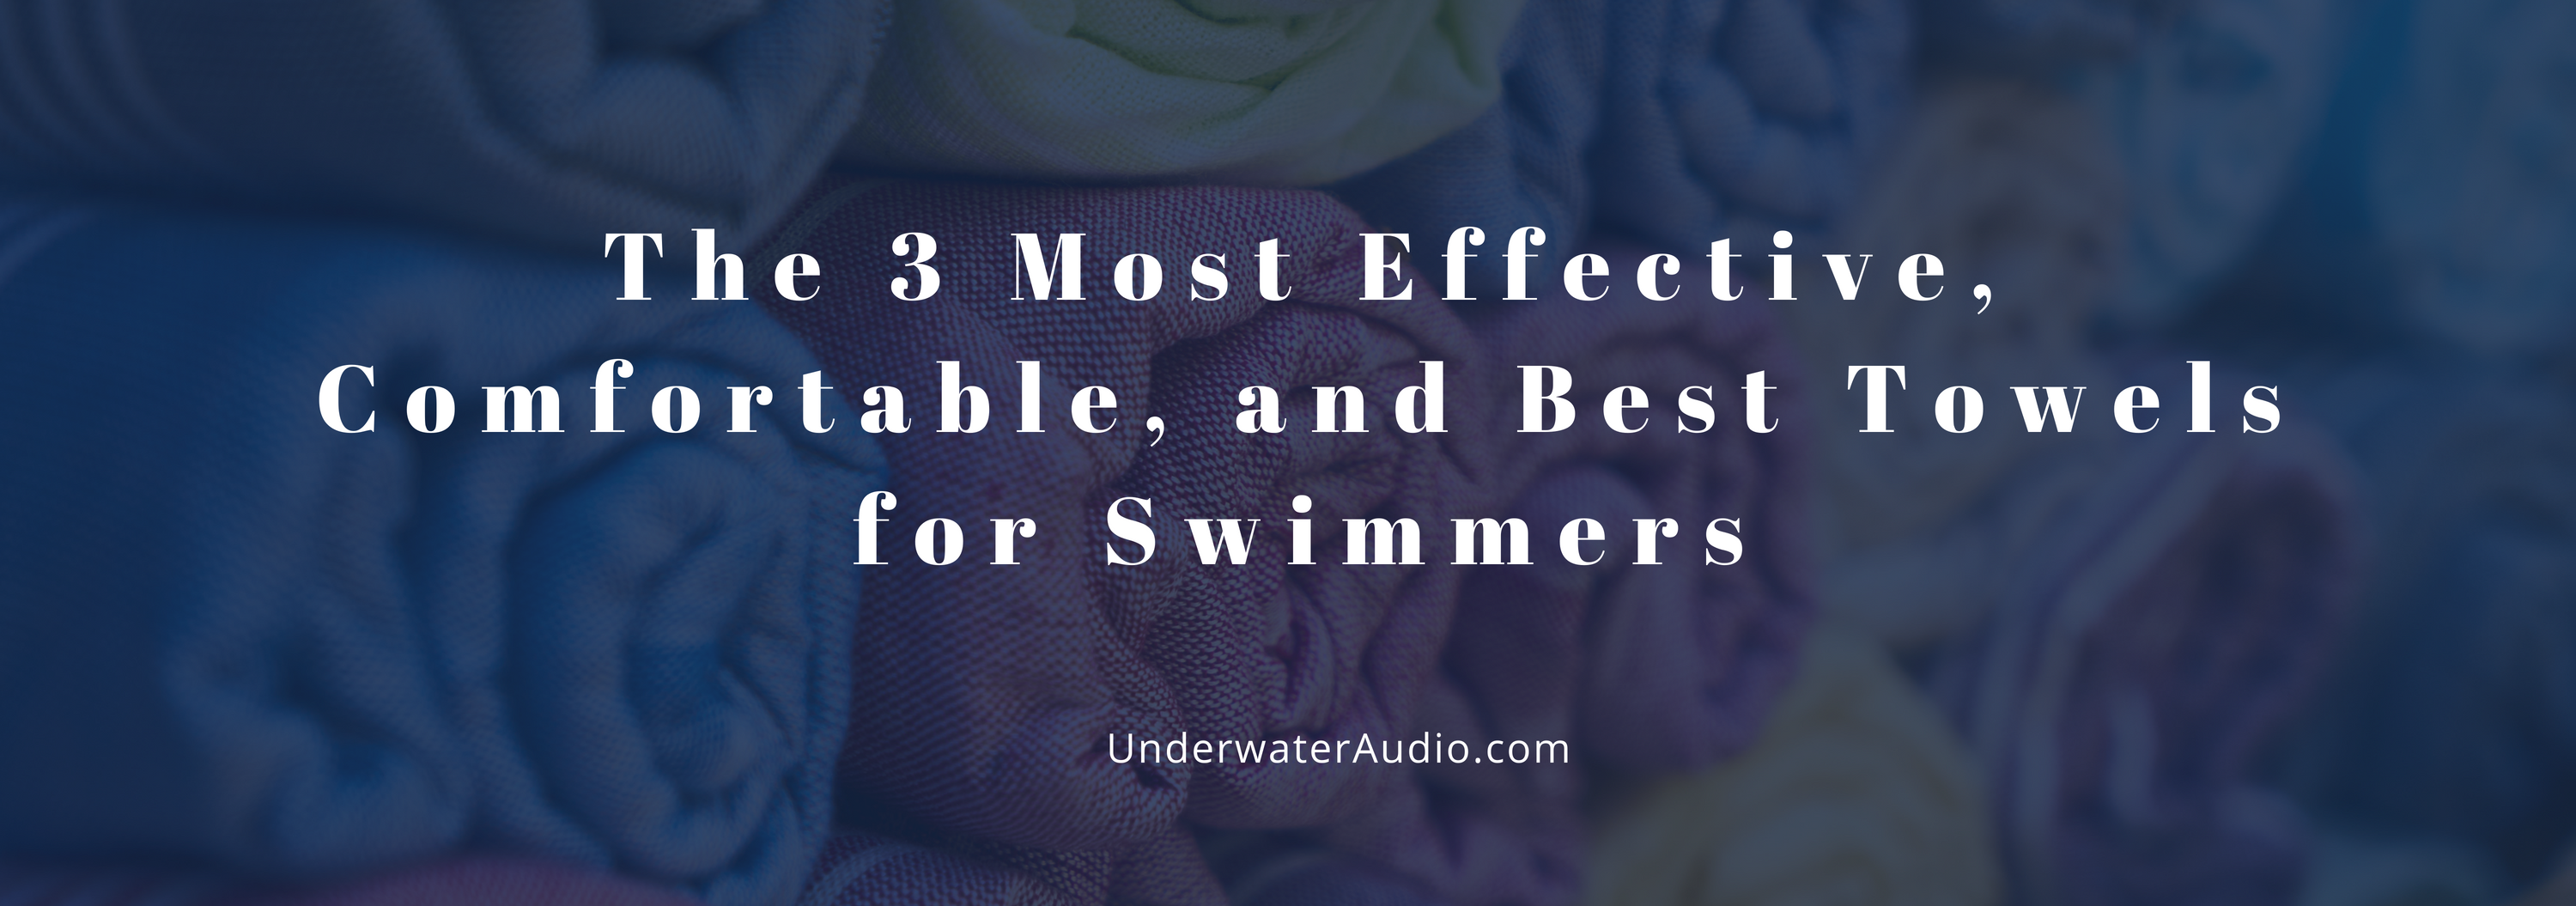 The 3 Most Effective, Comfortable, Best Towels for Swimmers